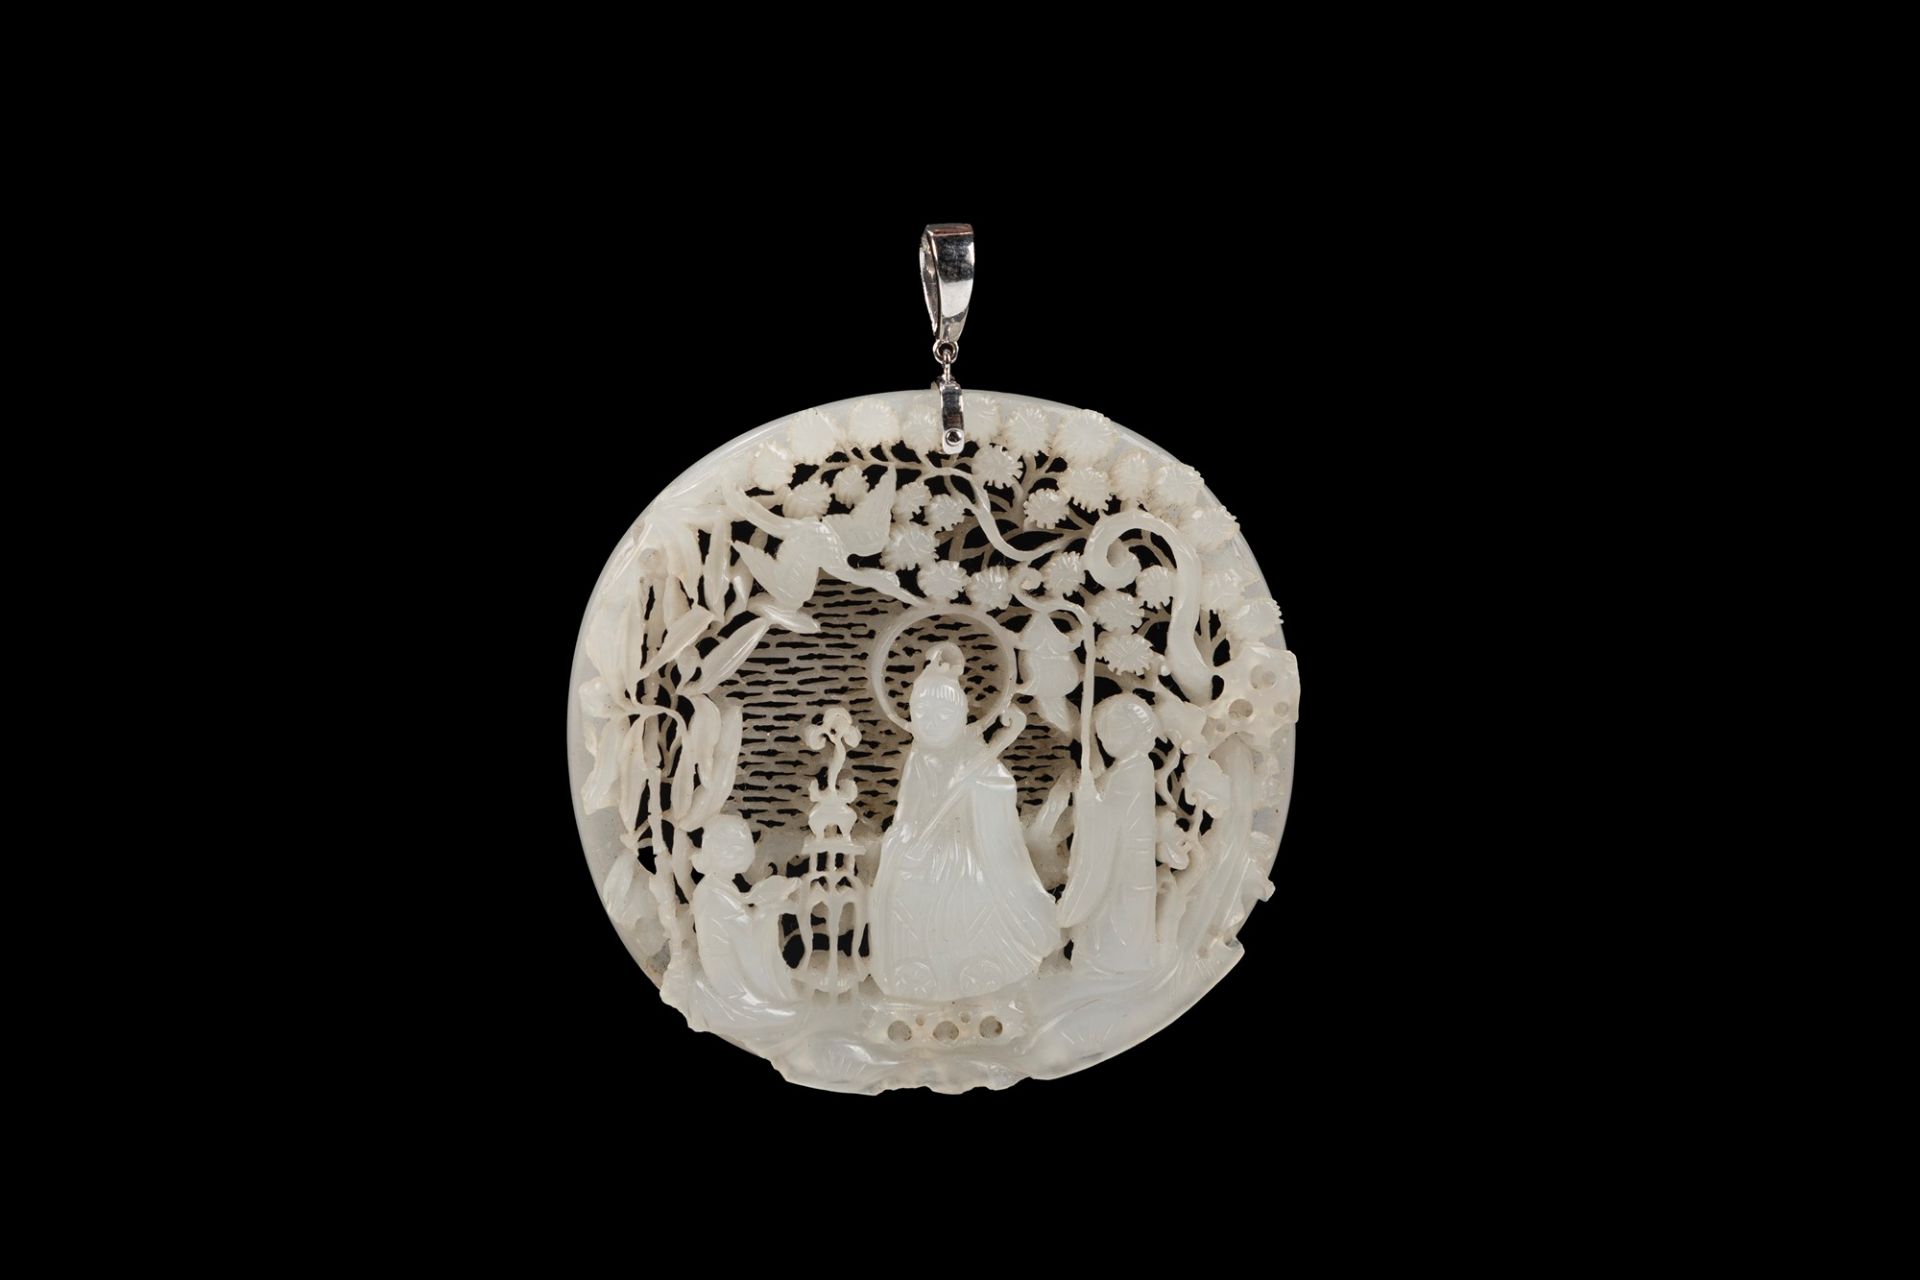 AN EXCEPTIONAL WHITE JADE OPENWORK FIGURAL PLAQUE, China, Liao - Yuan period